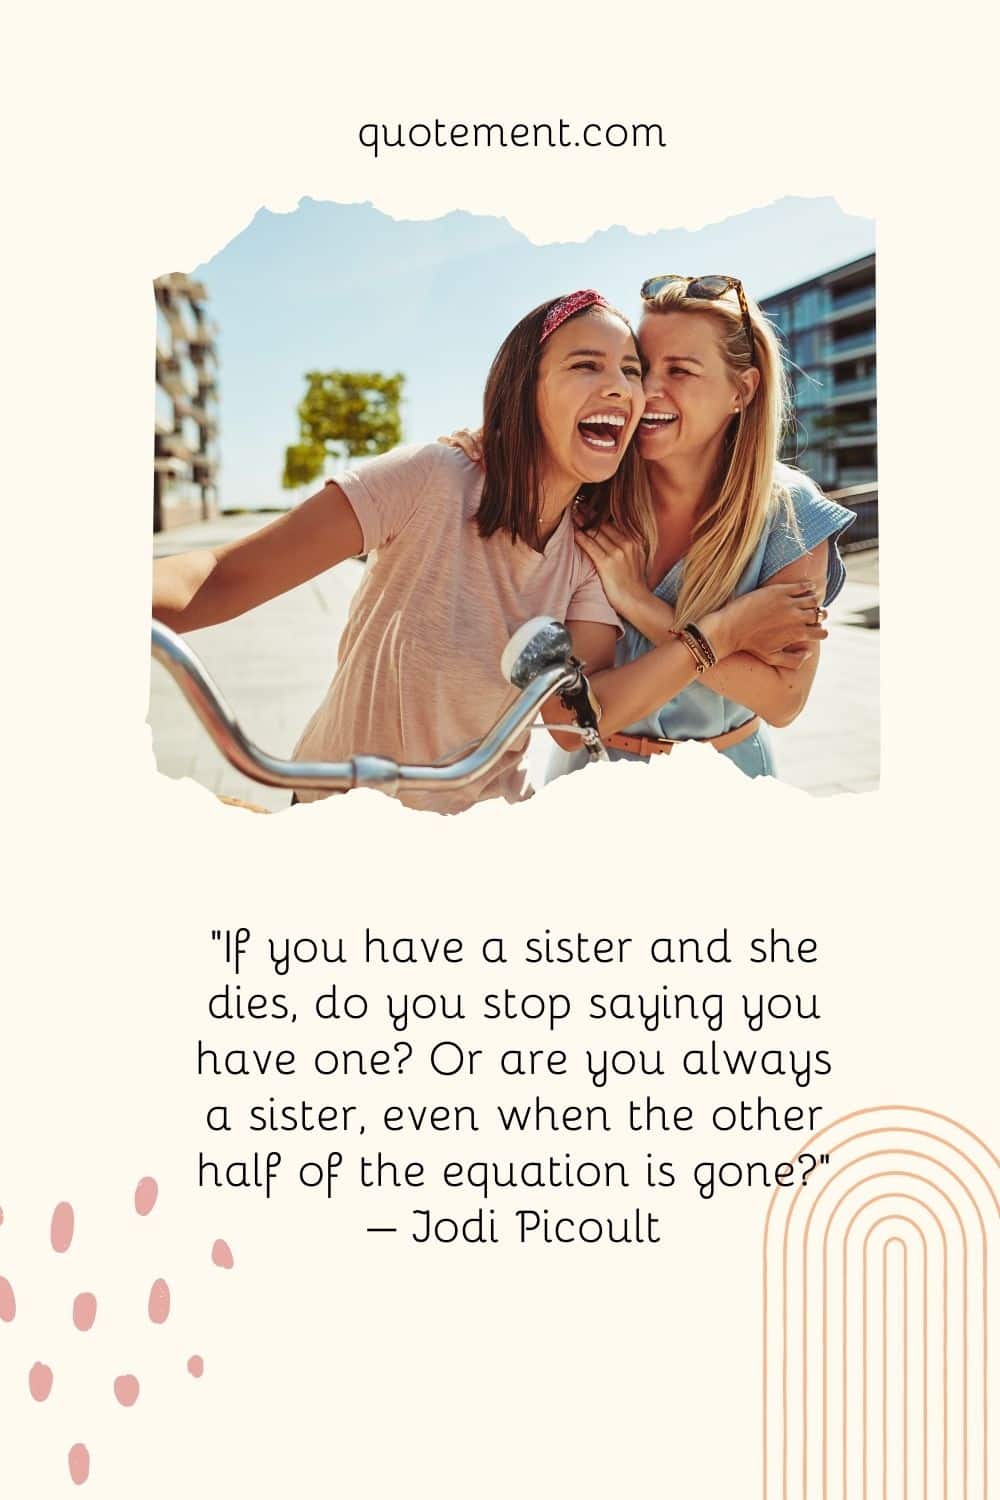 “If you have a sister and she dies, do you stop saying you have one Or are you always a sister, even when the other half of the equation is gone” – Jodi Picoult